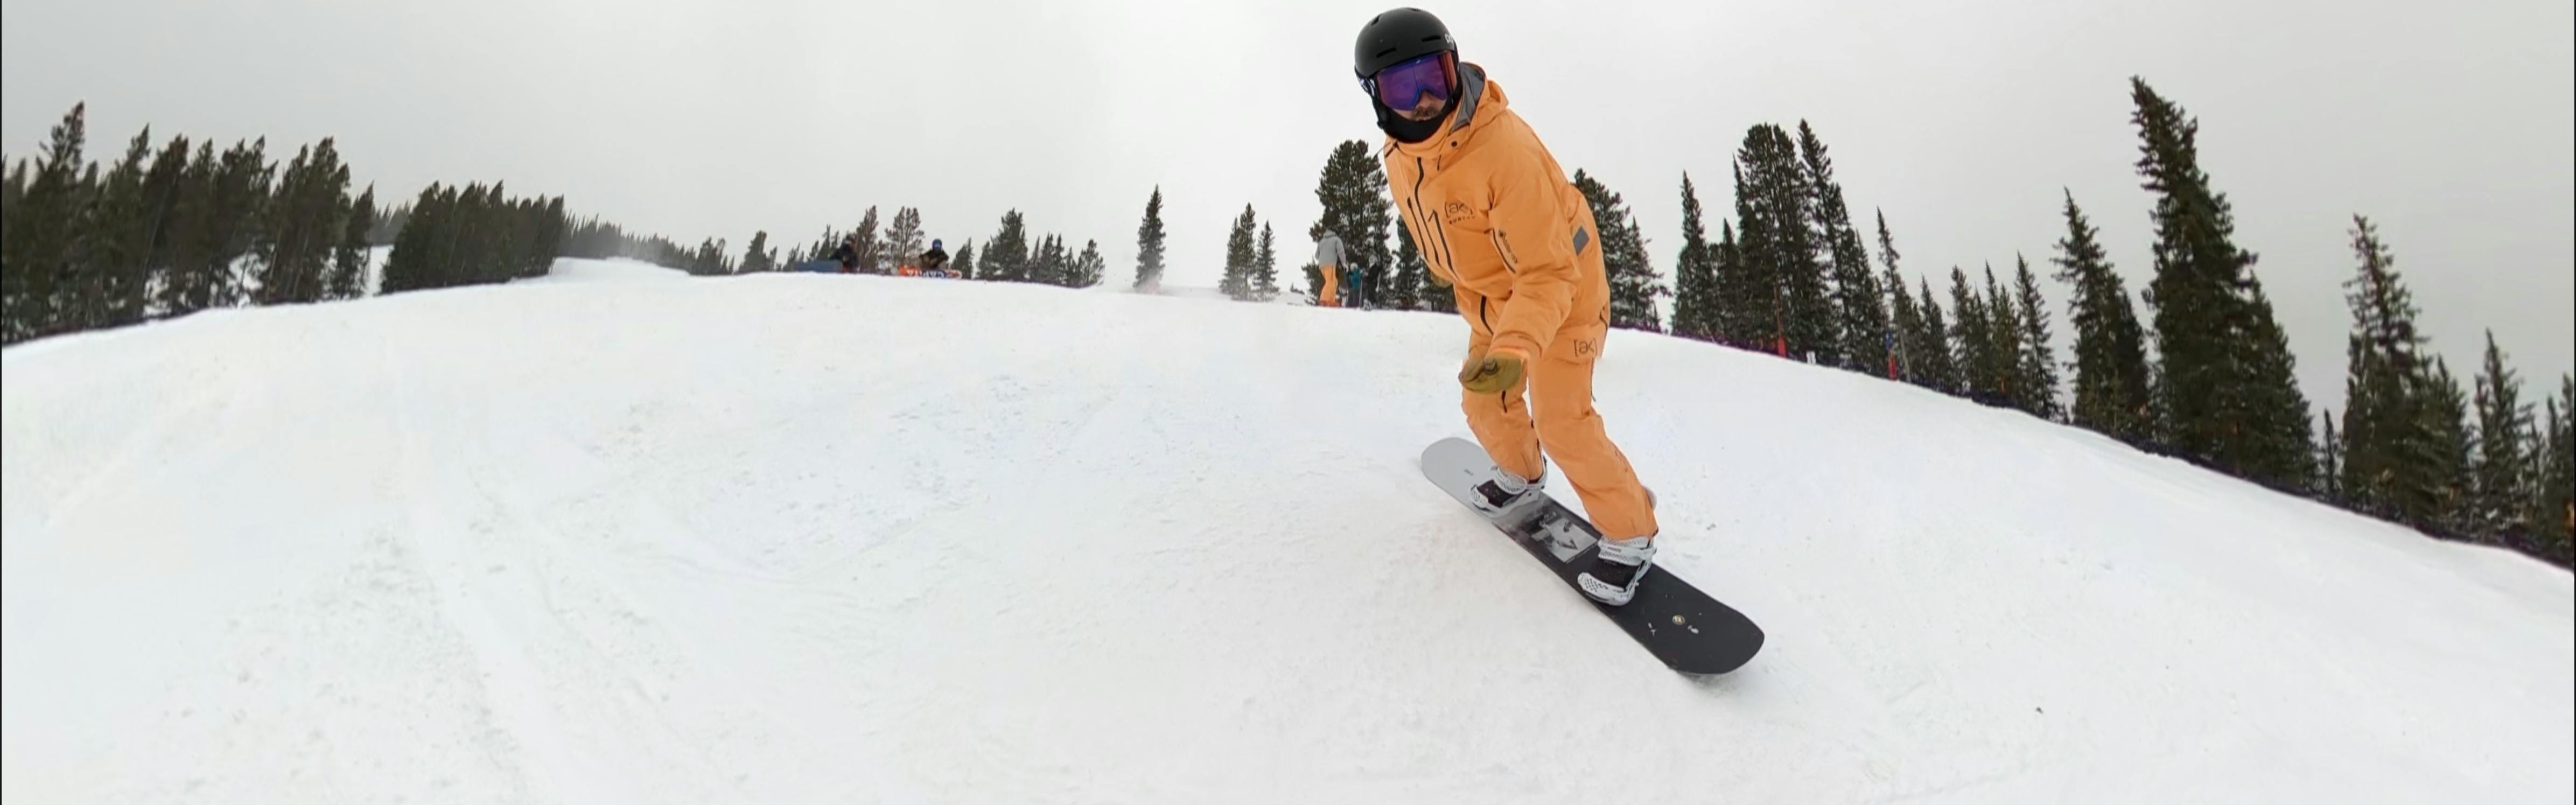 A snowboarder on the CAPiTA Super Defenders of Awesome Snowboard.